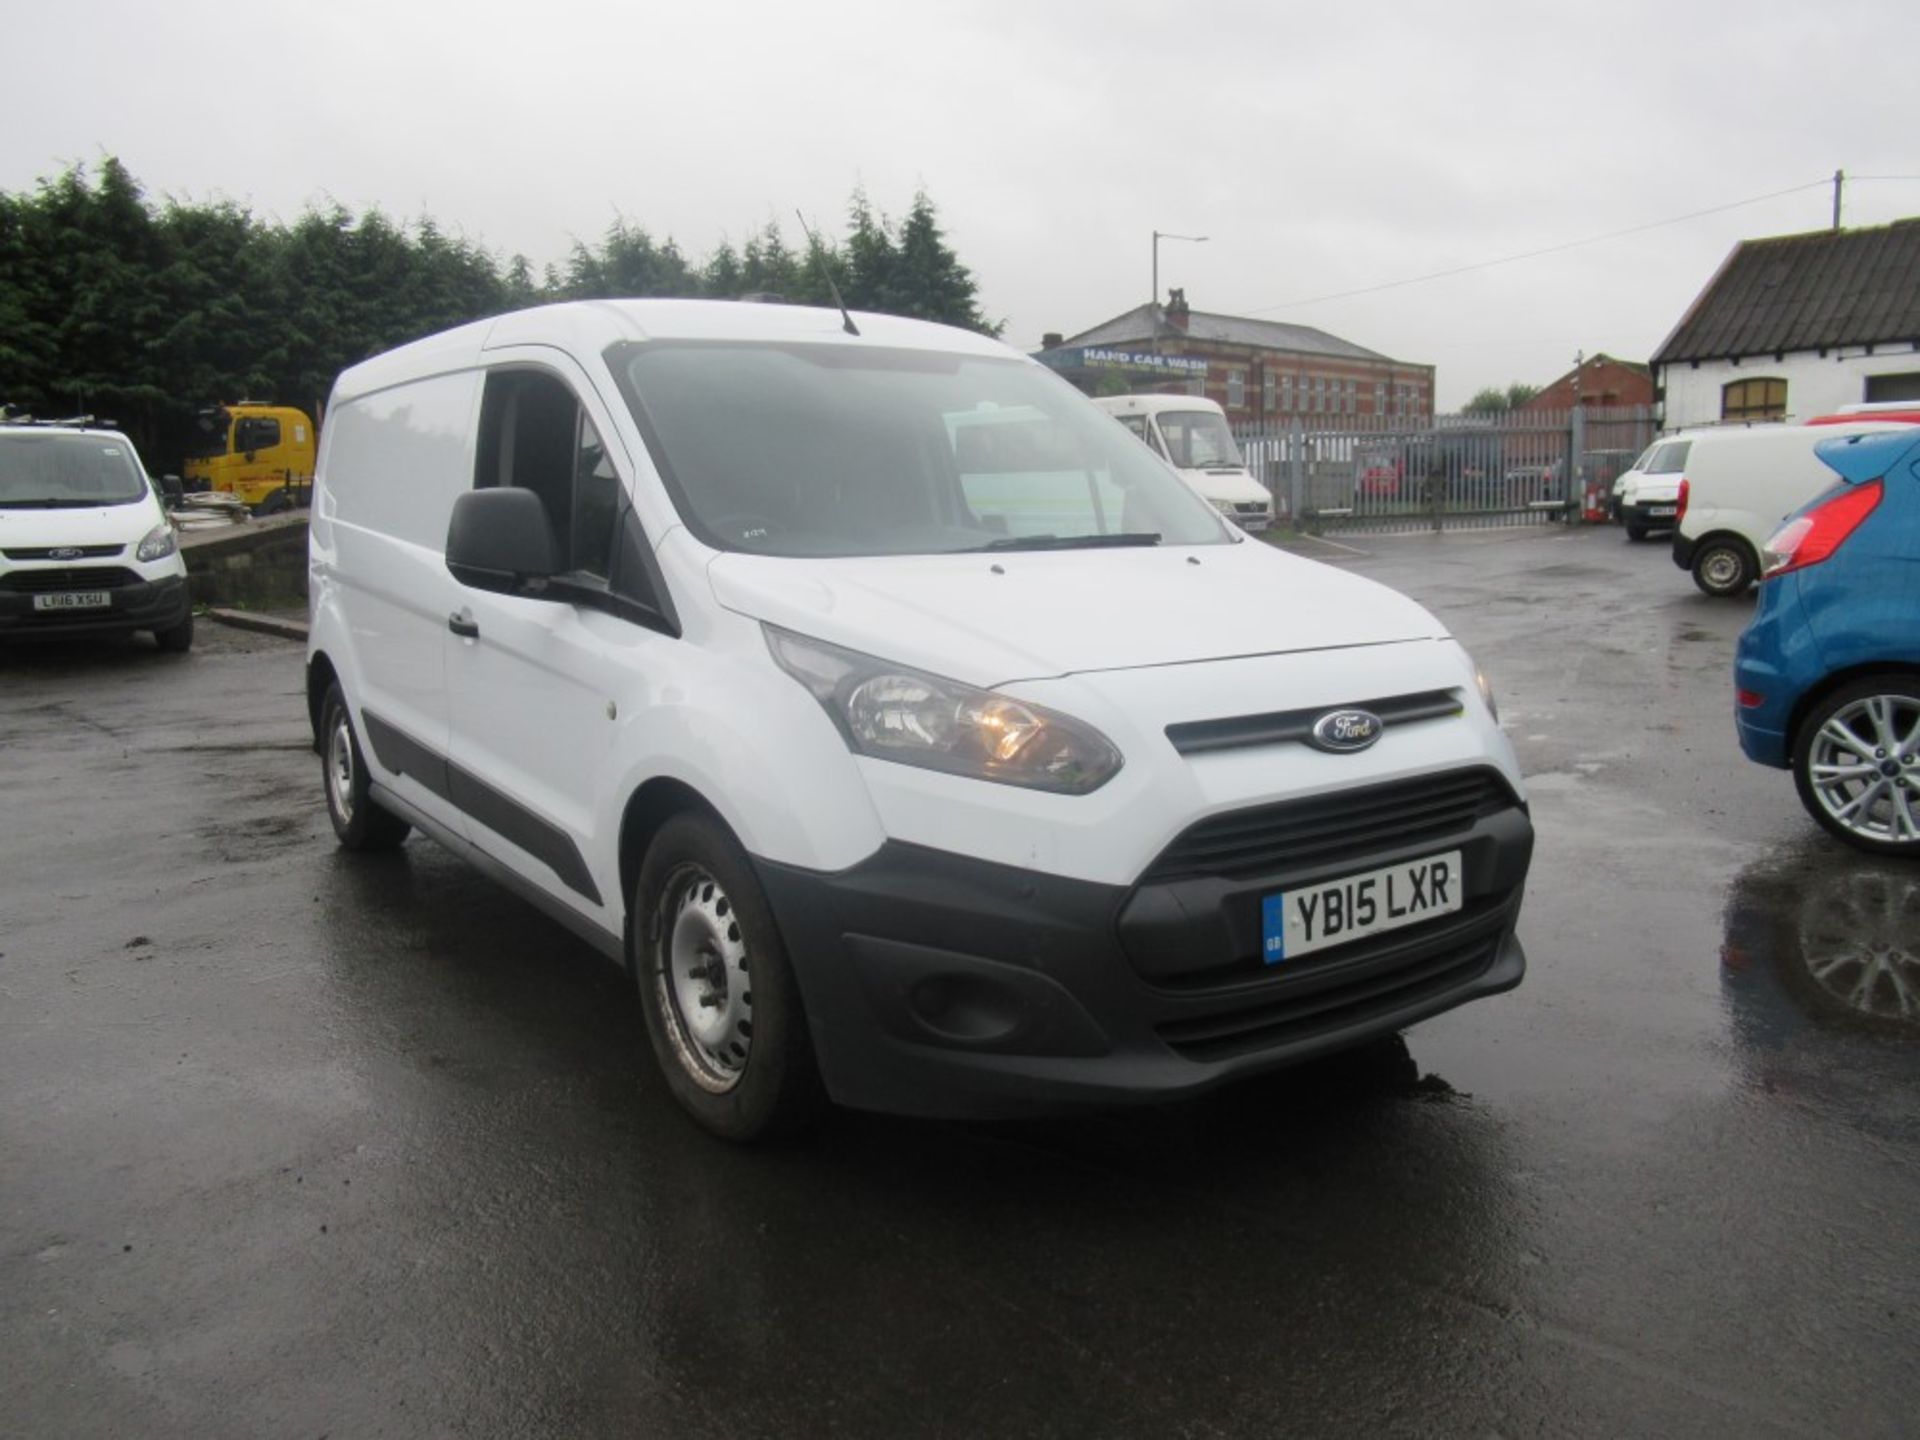 15 reg FORD TRANSIT CONNECT 210 ECO-TECH, 1ST REG 06/15, TEST 06/20, 112967M WARRANTED, V5 HERE, 1